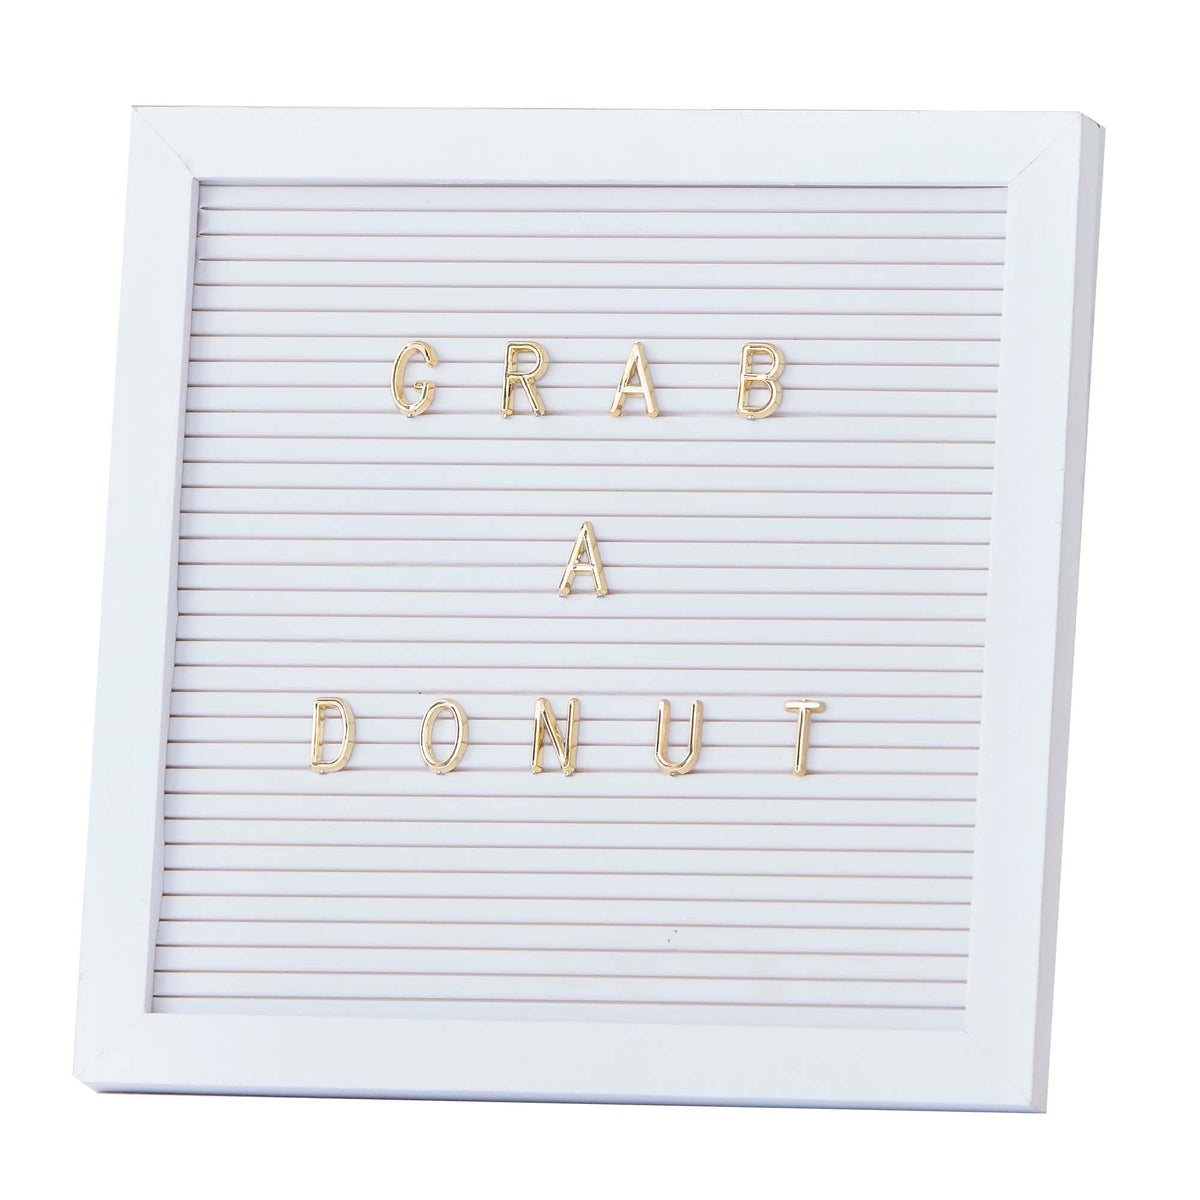 AMSCAN CA Wedding White Peg Board With Gold Letters, 1 Count 5056567029515